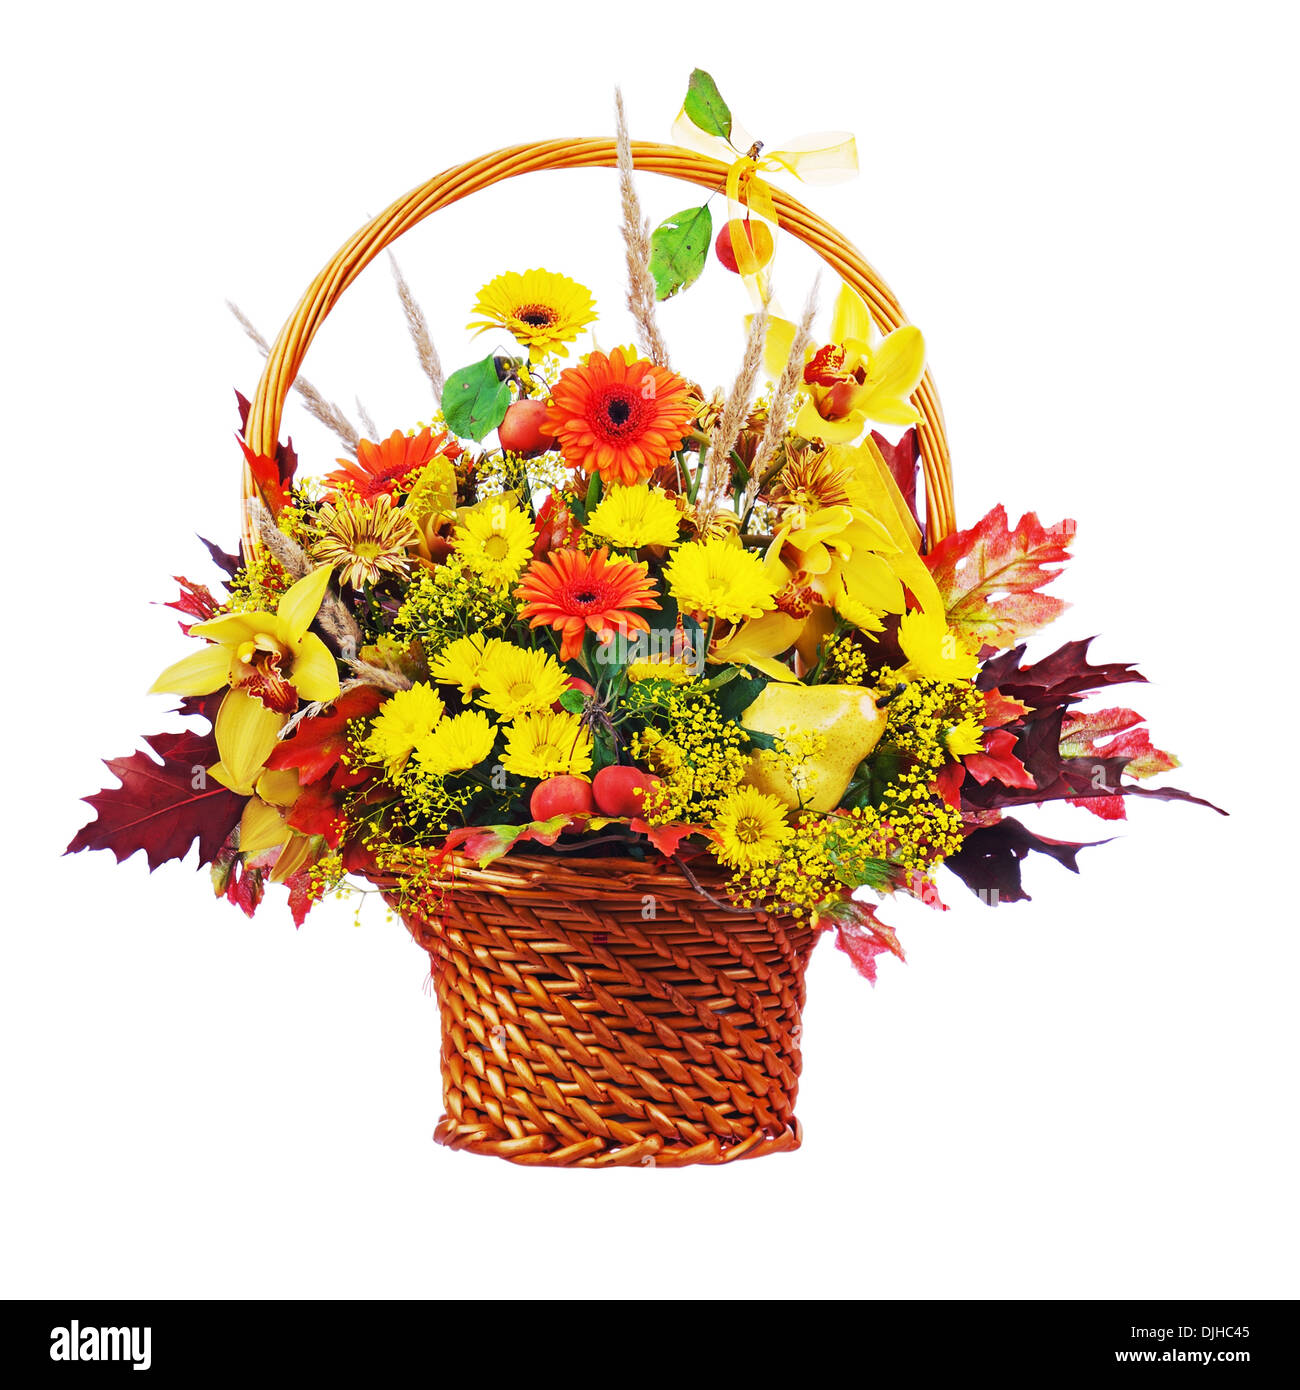 Colorful flower bouquet arrangement centerpiece in wicker basket isolated on white background. Closeup. Stock Photo